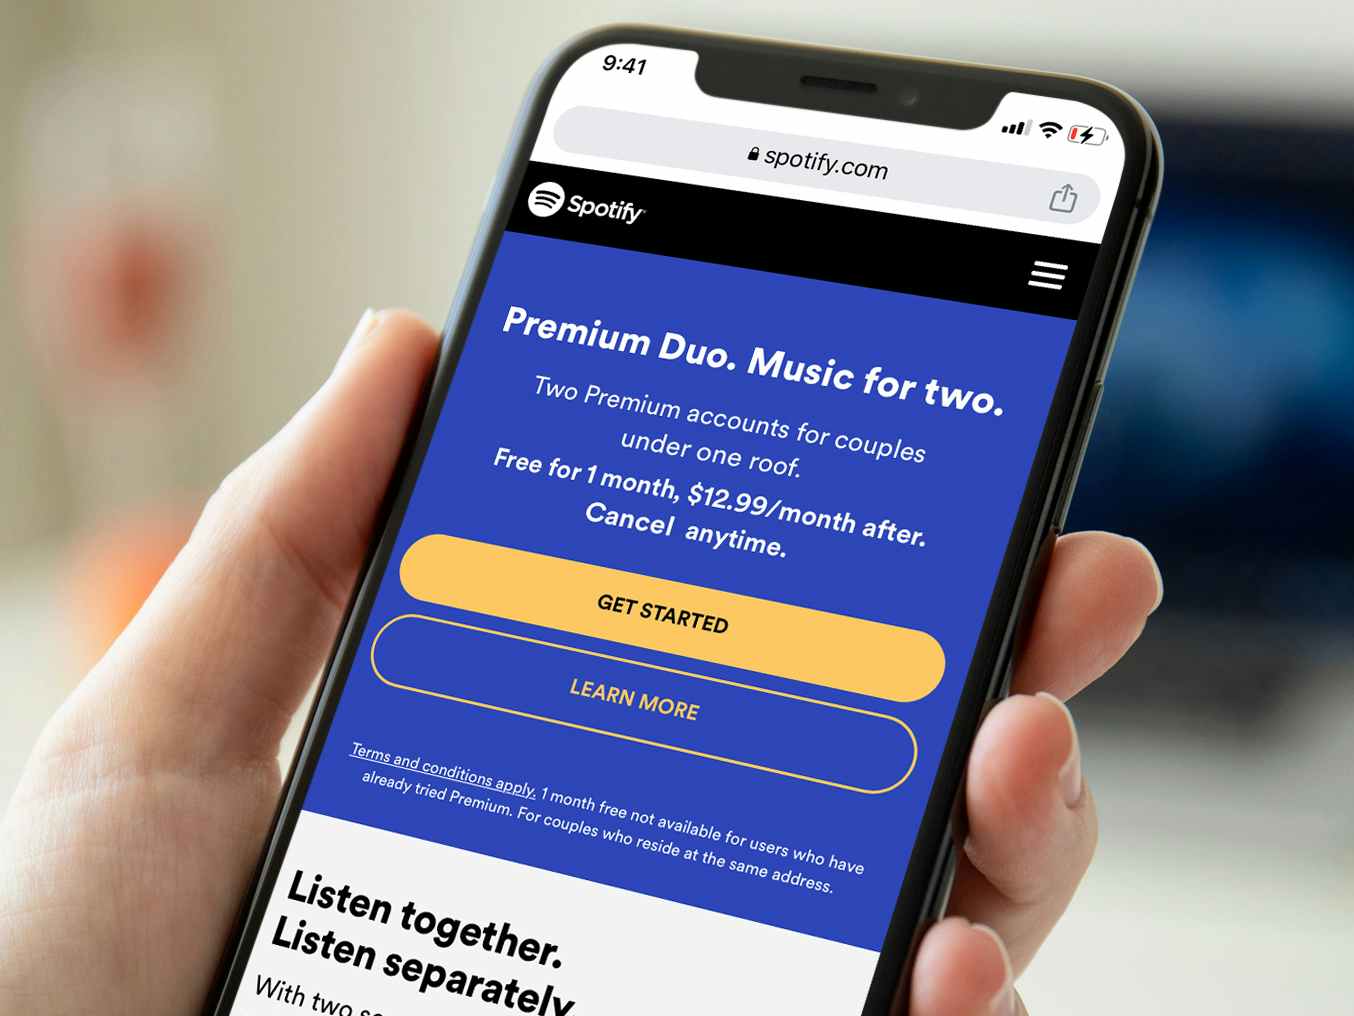 person holding a phone with a screeshot showing spotify premium duo plan details